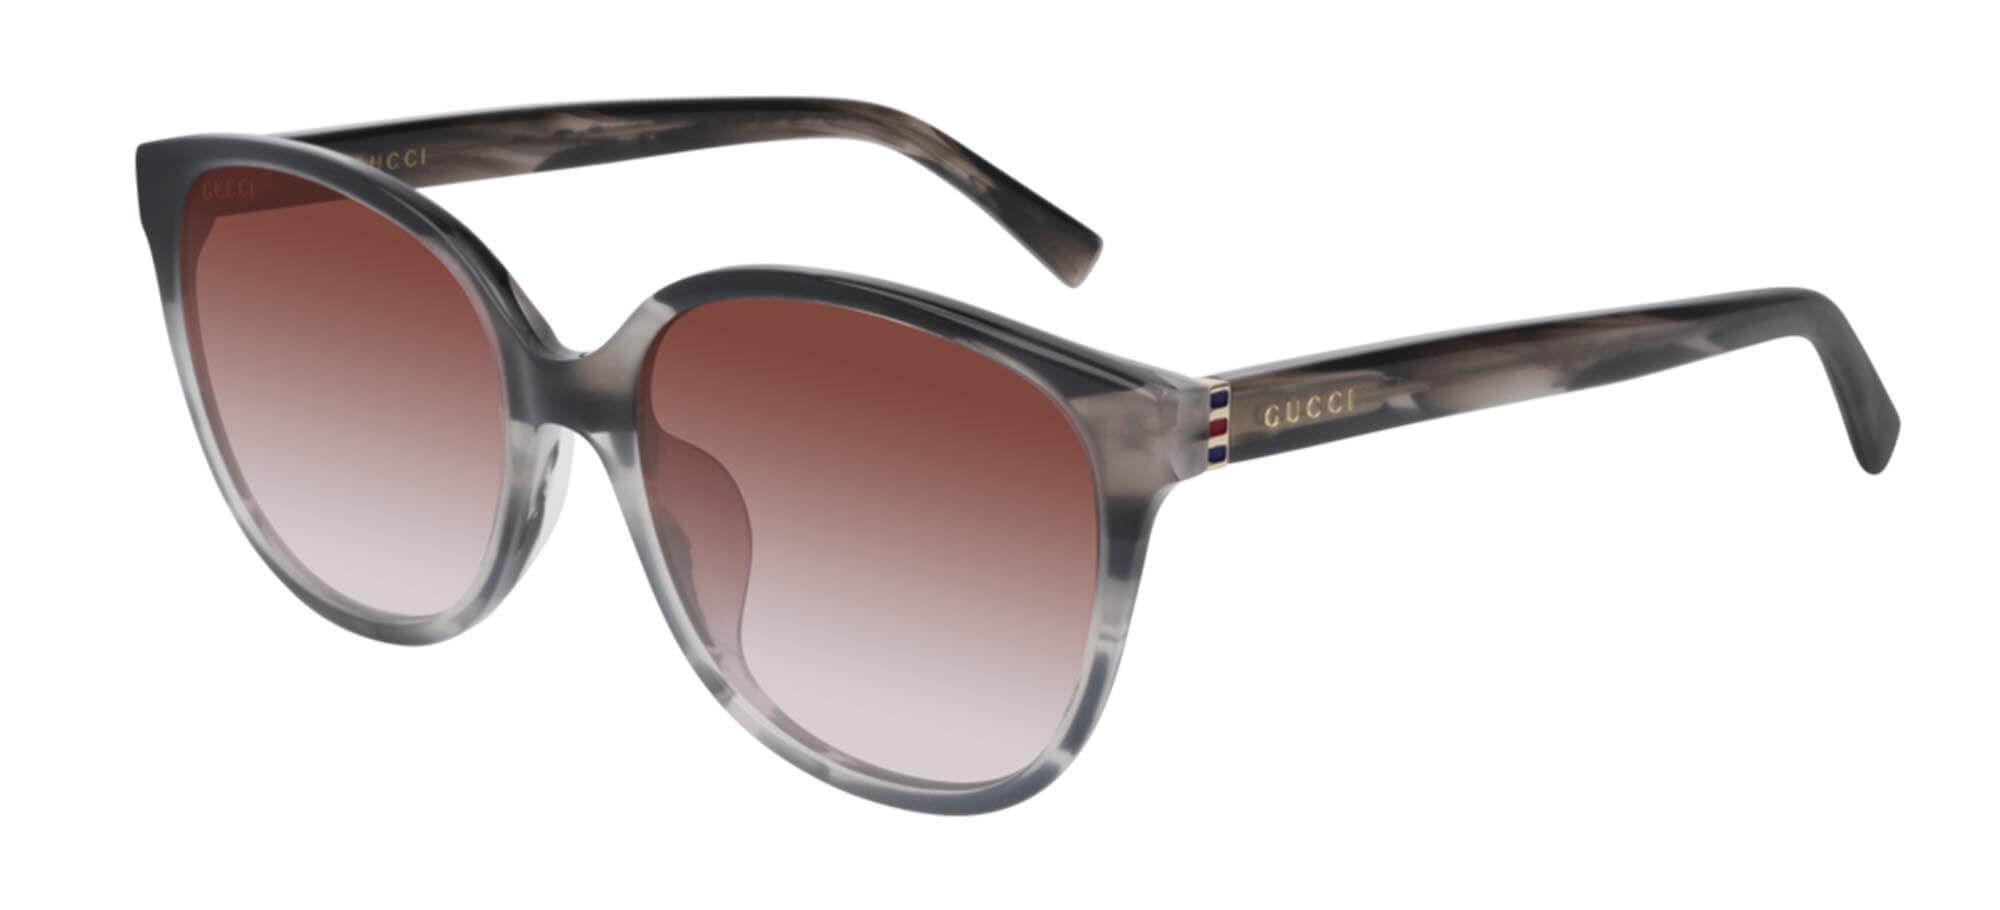 GucciGG0461SAStriped Grey/red Brown Shaded (004 HJ)